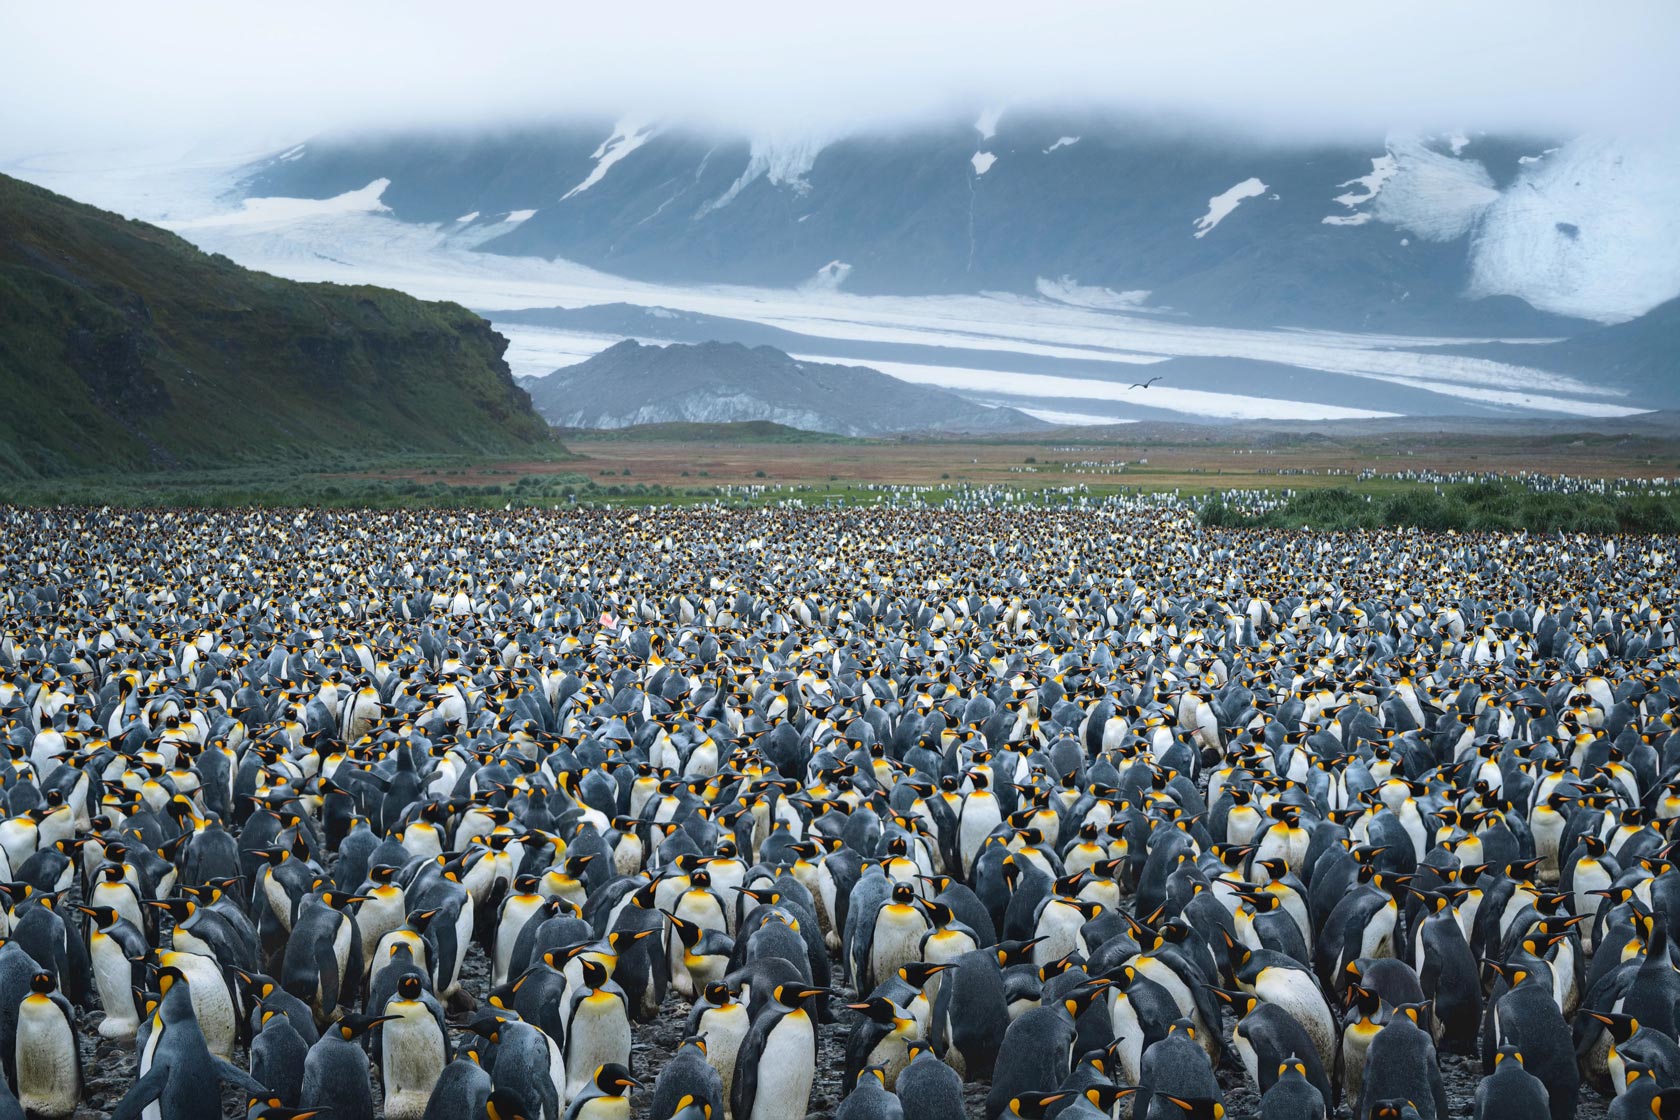 King Penguins at the Valley of the Kings